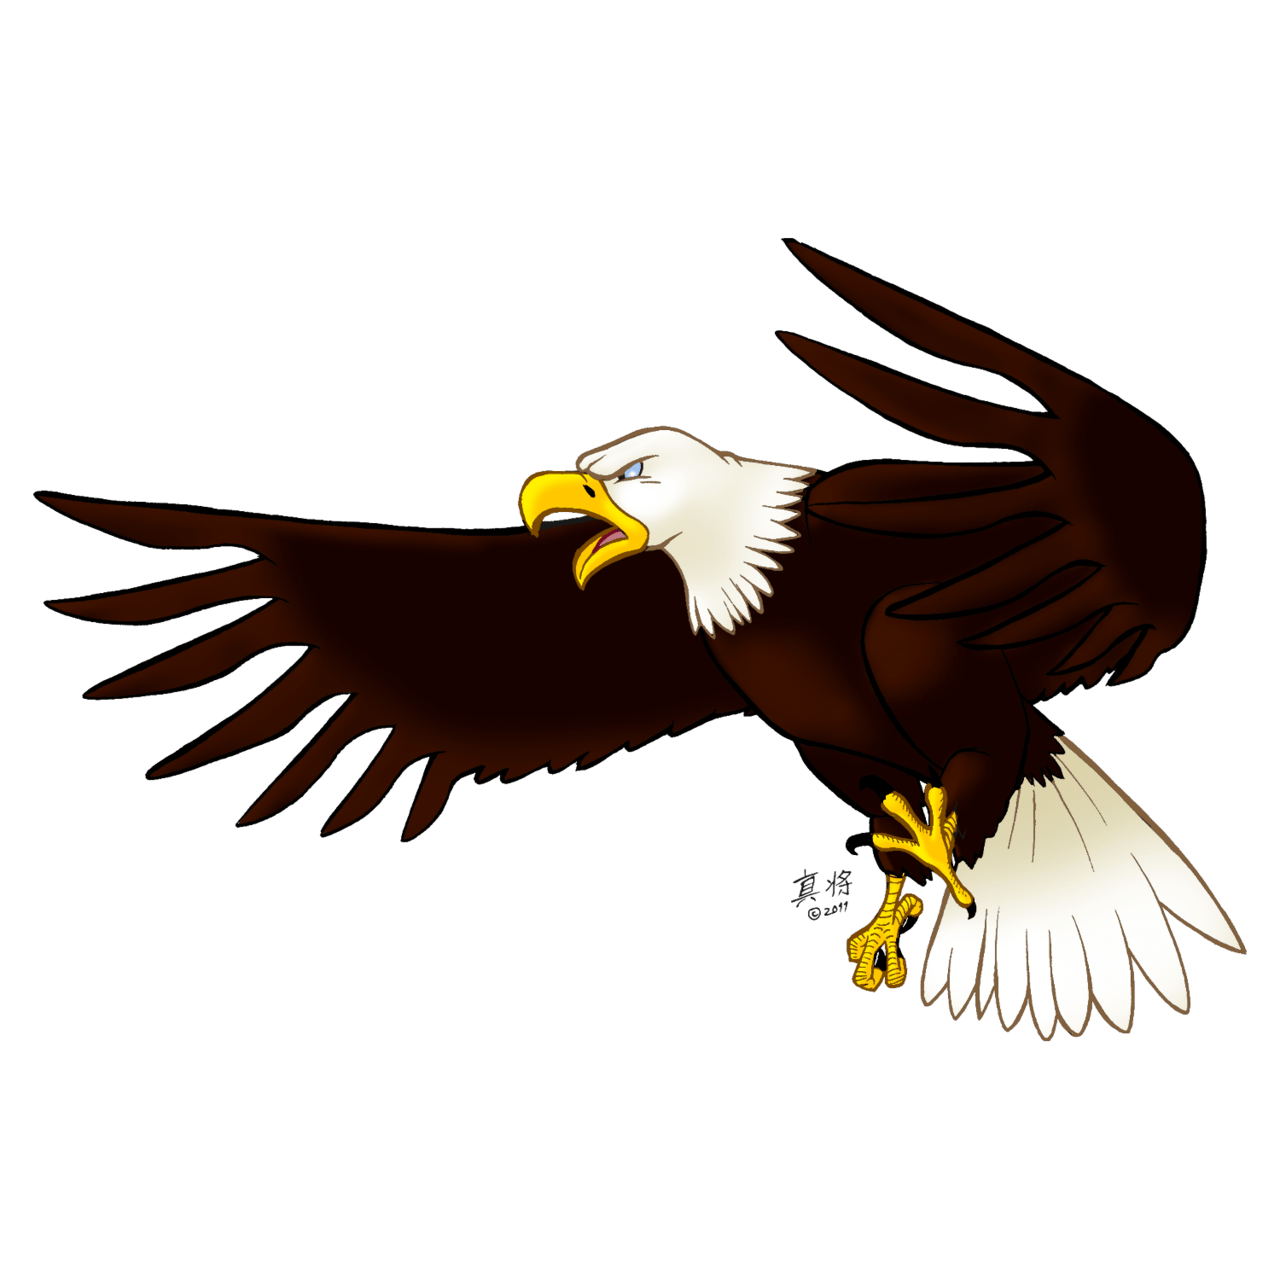 Eagle clipart majestic. Png free images toppng